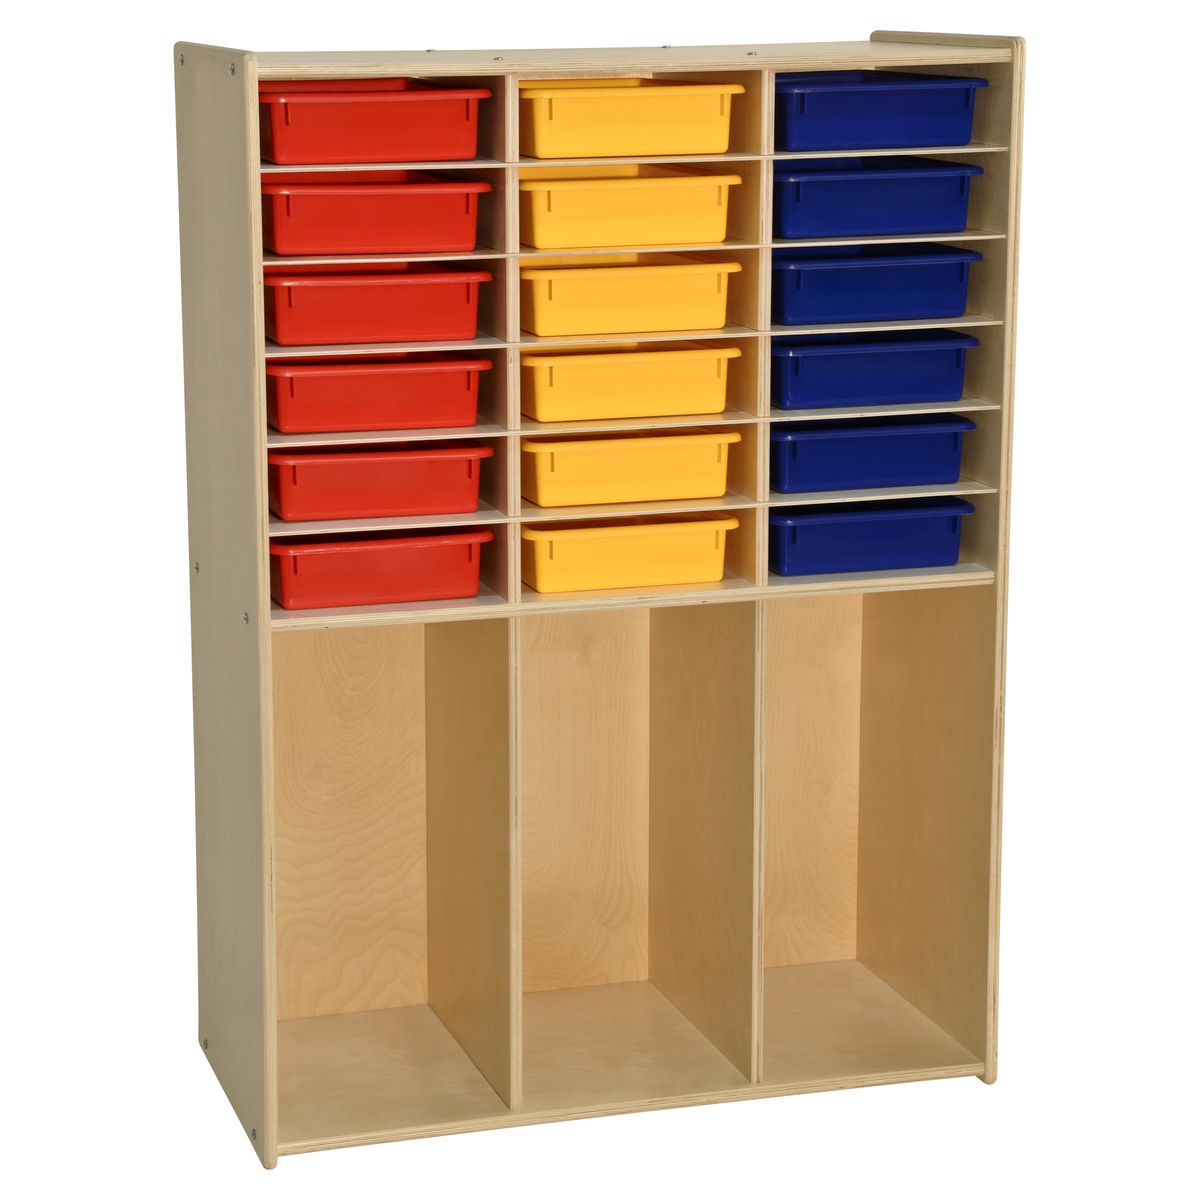 C990343f-at 18 Bin Cabinet With Assorted Color - Assembled